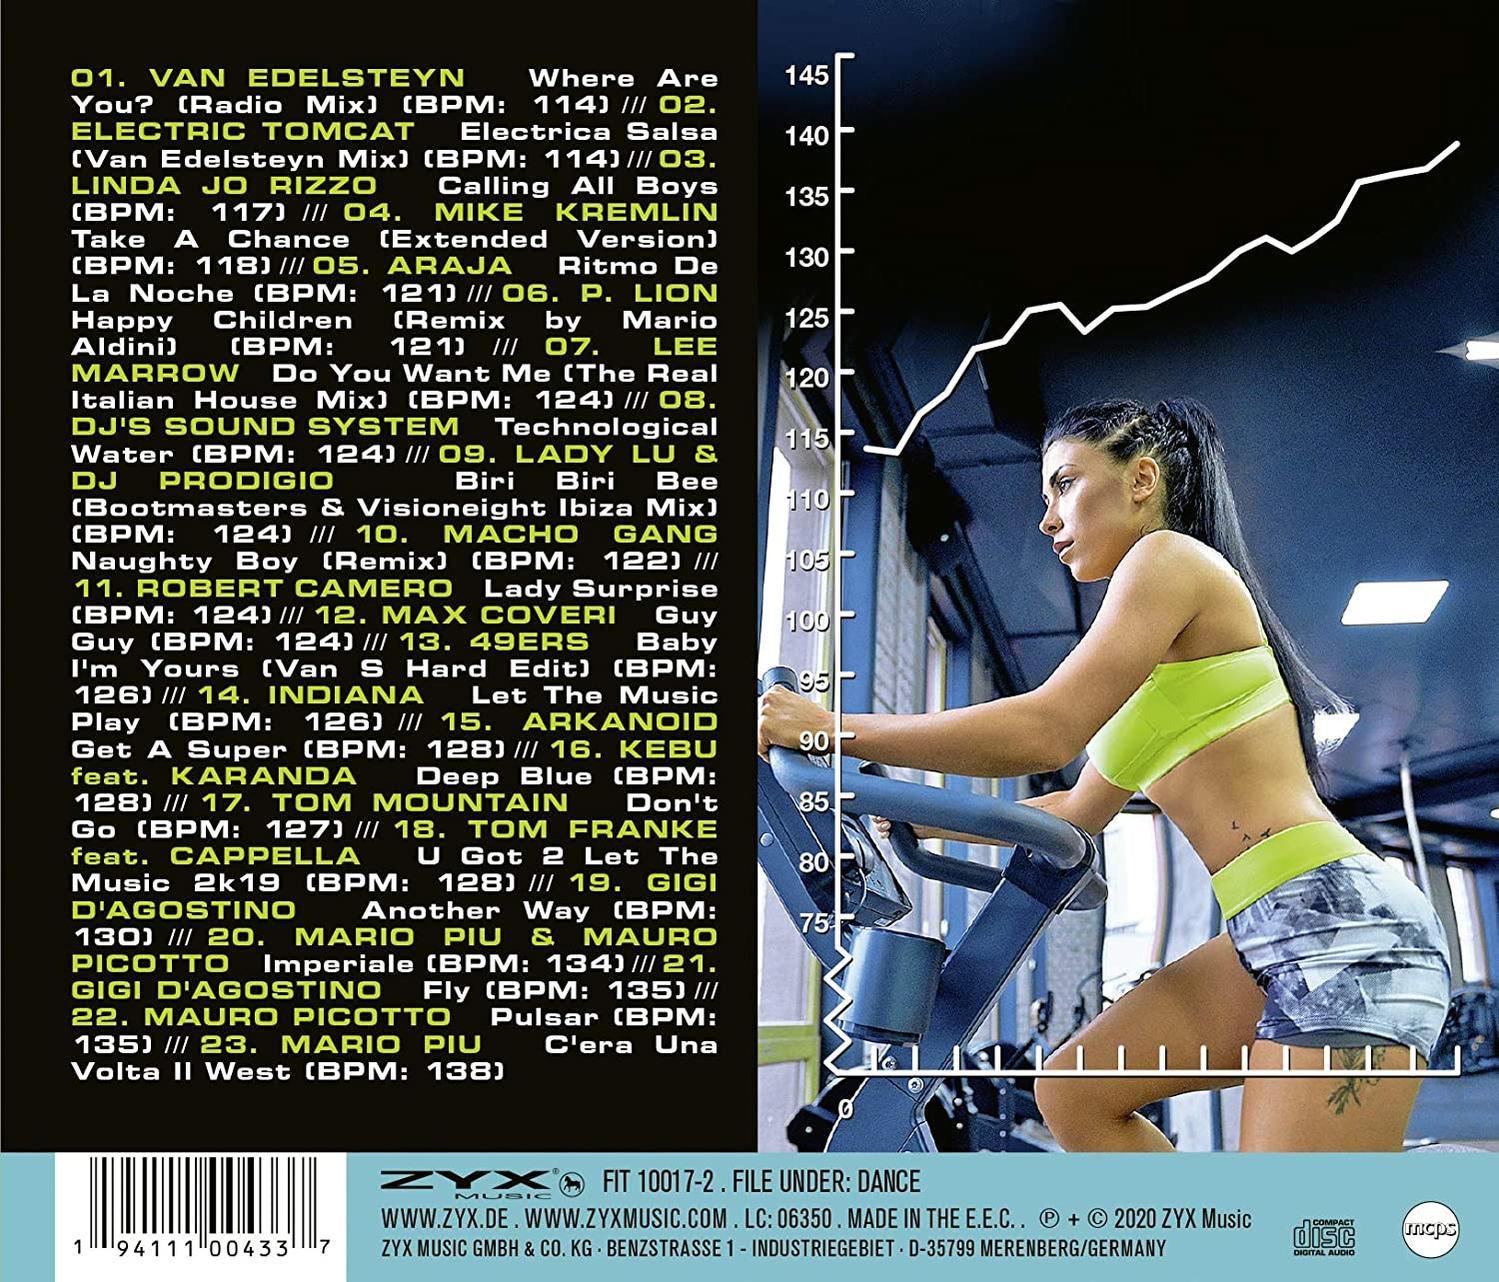 VARIOUS - Power Indoor Cycling - (CD)